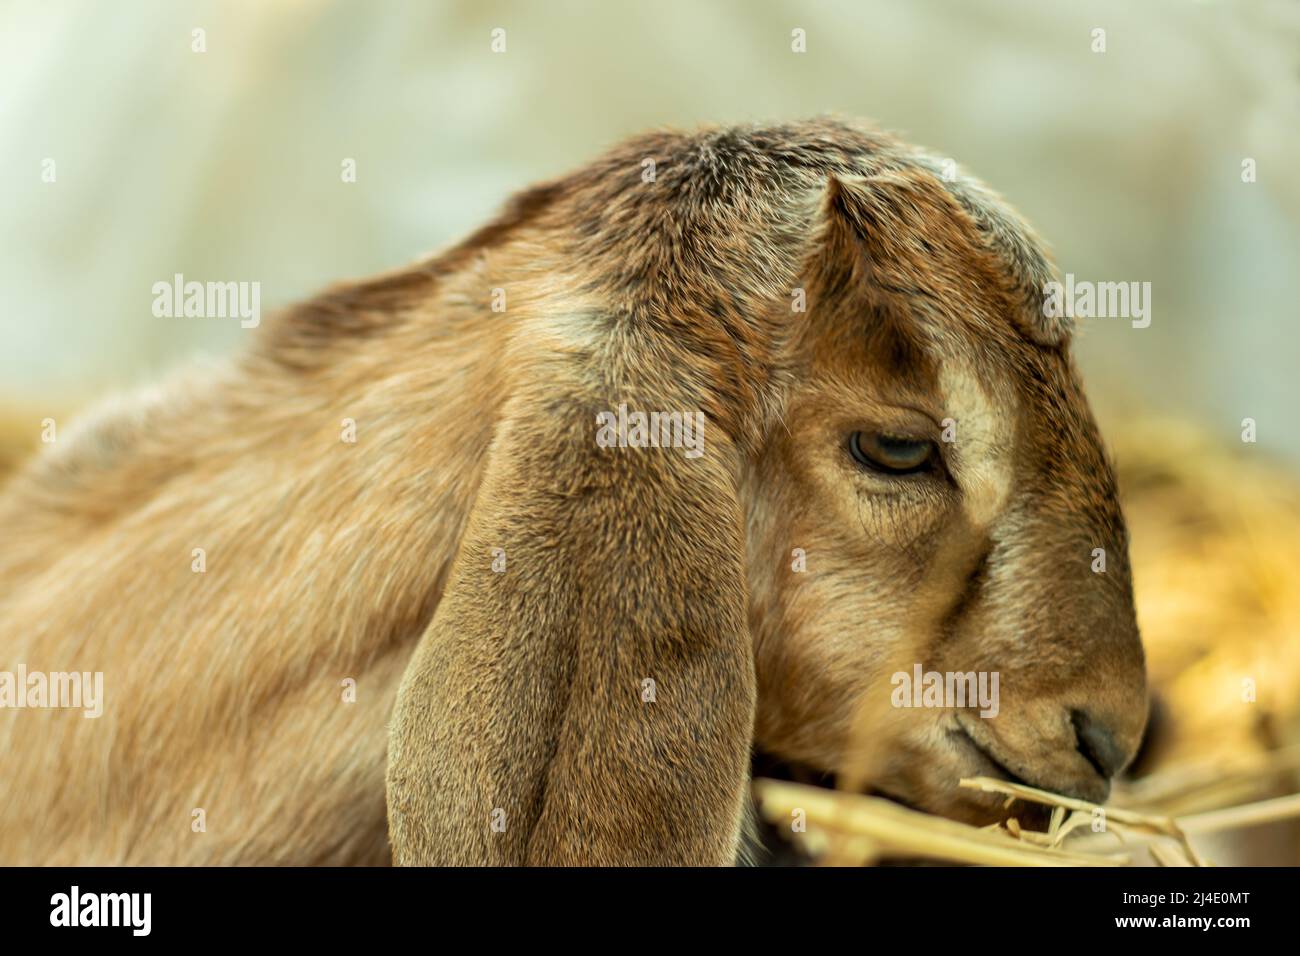 A goat is a farm or domesticated animal or a wild animal that is about the size of a sheep. The moment of eating grass in black, gray, and white goat. Stock Photo